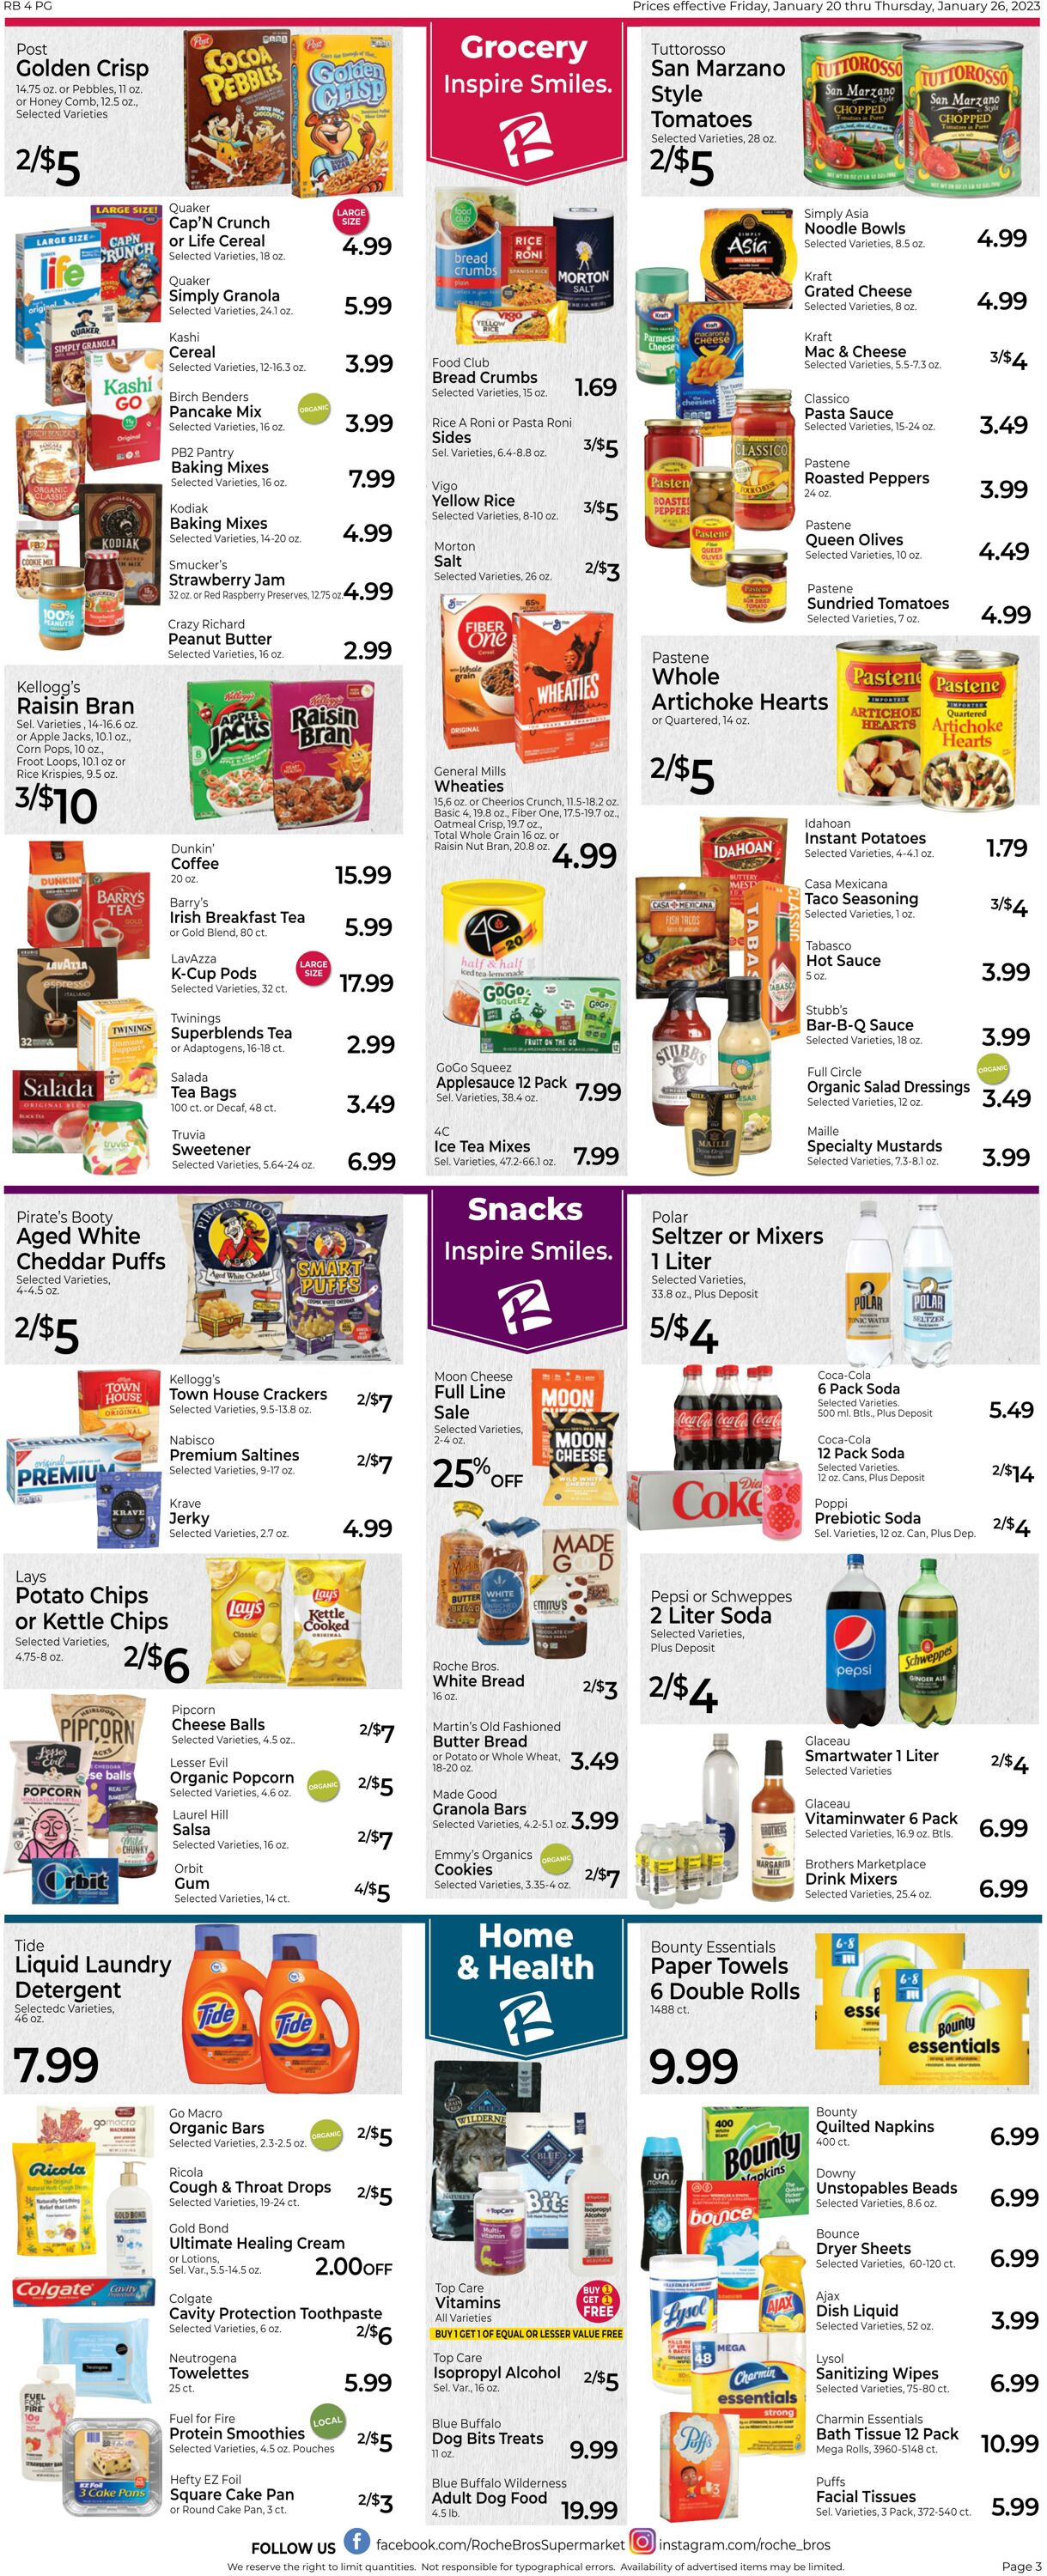 Weekly ad Roche Bros 01/20/2023 - 01/26/2023